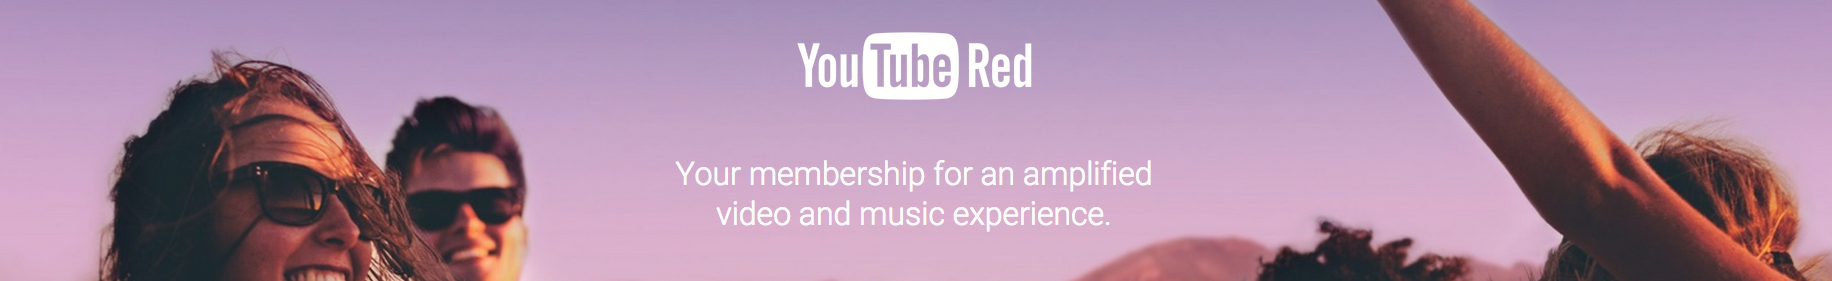 YOUTUBE RED PAGE